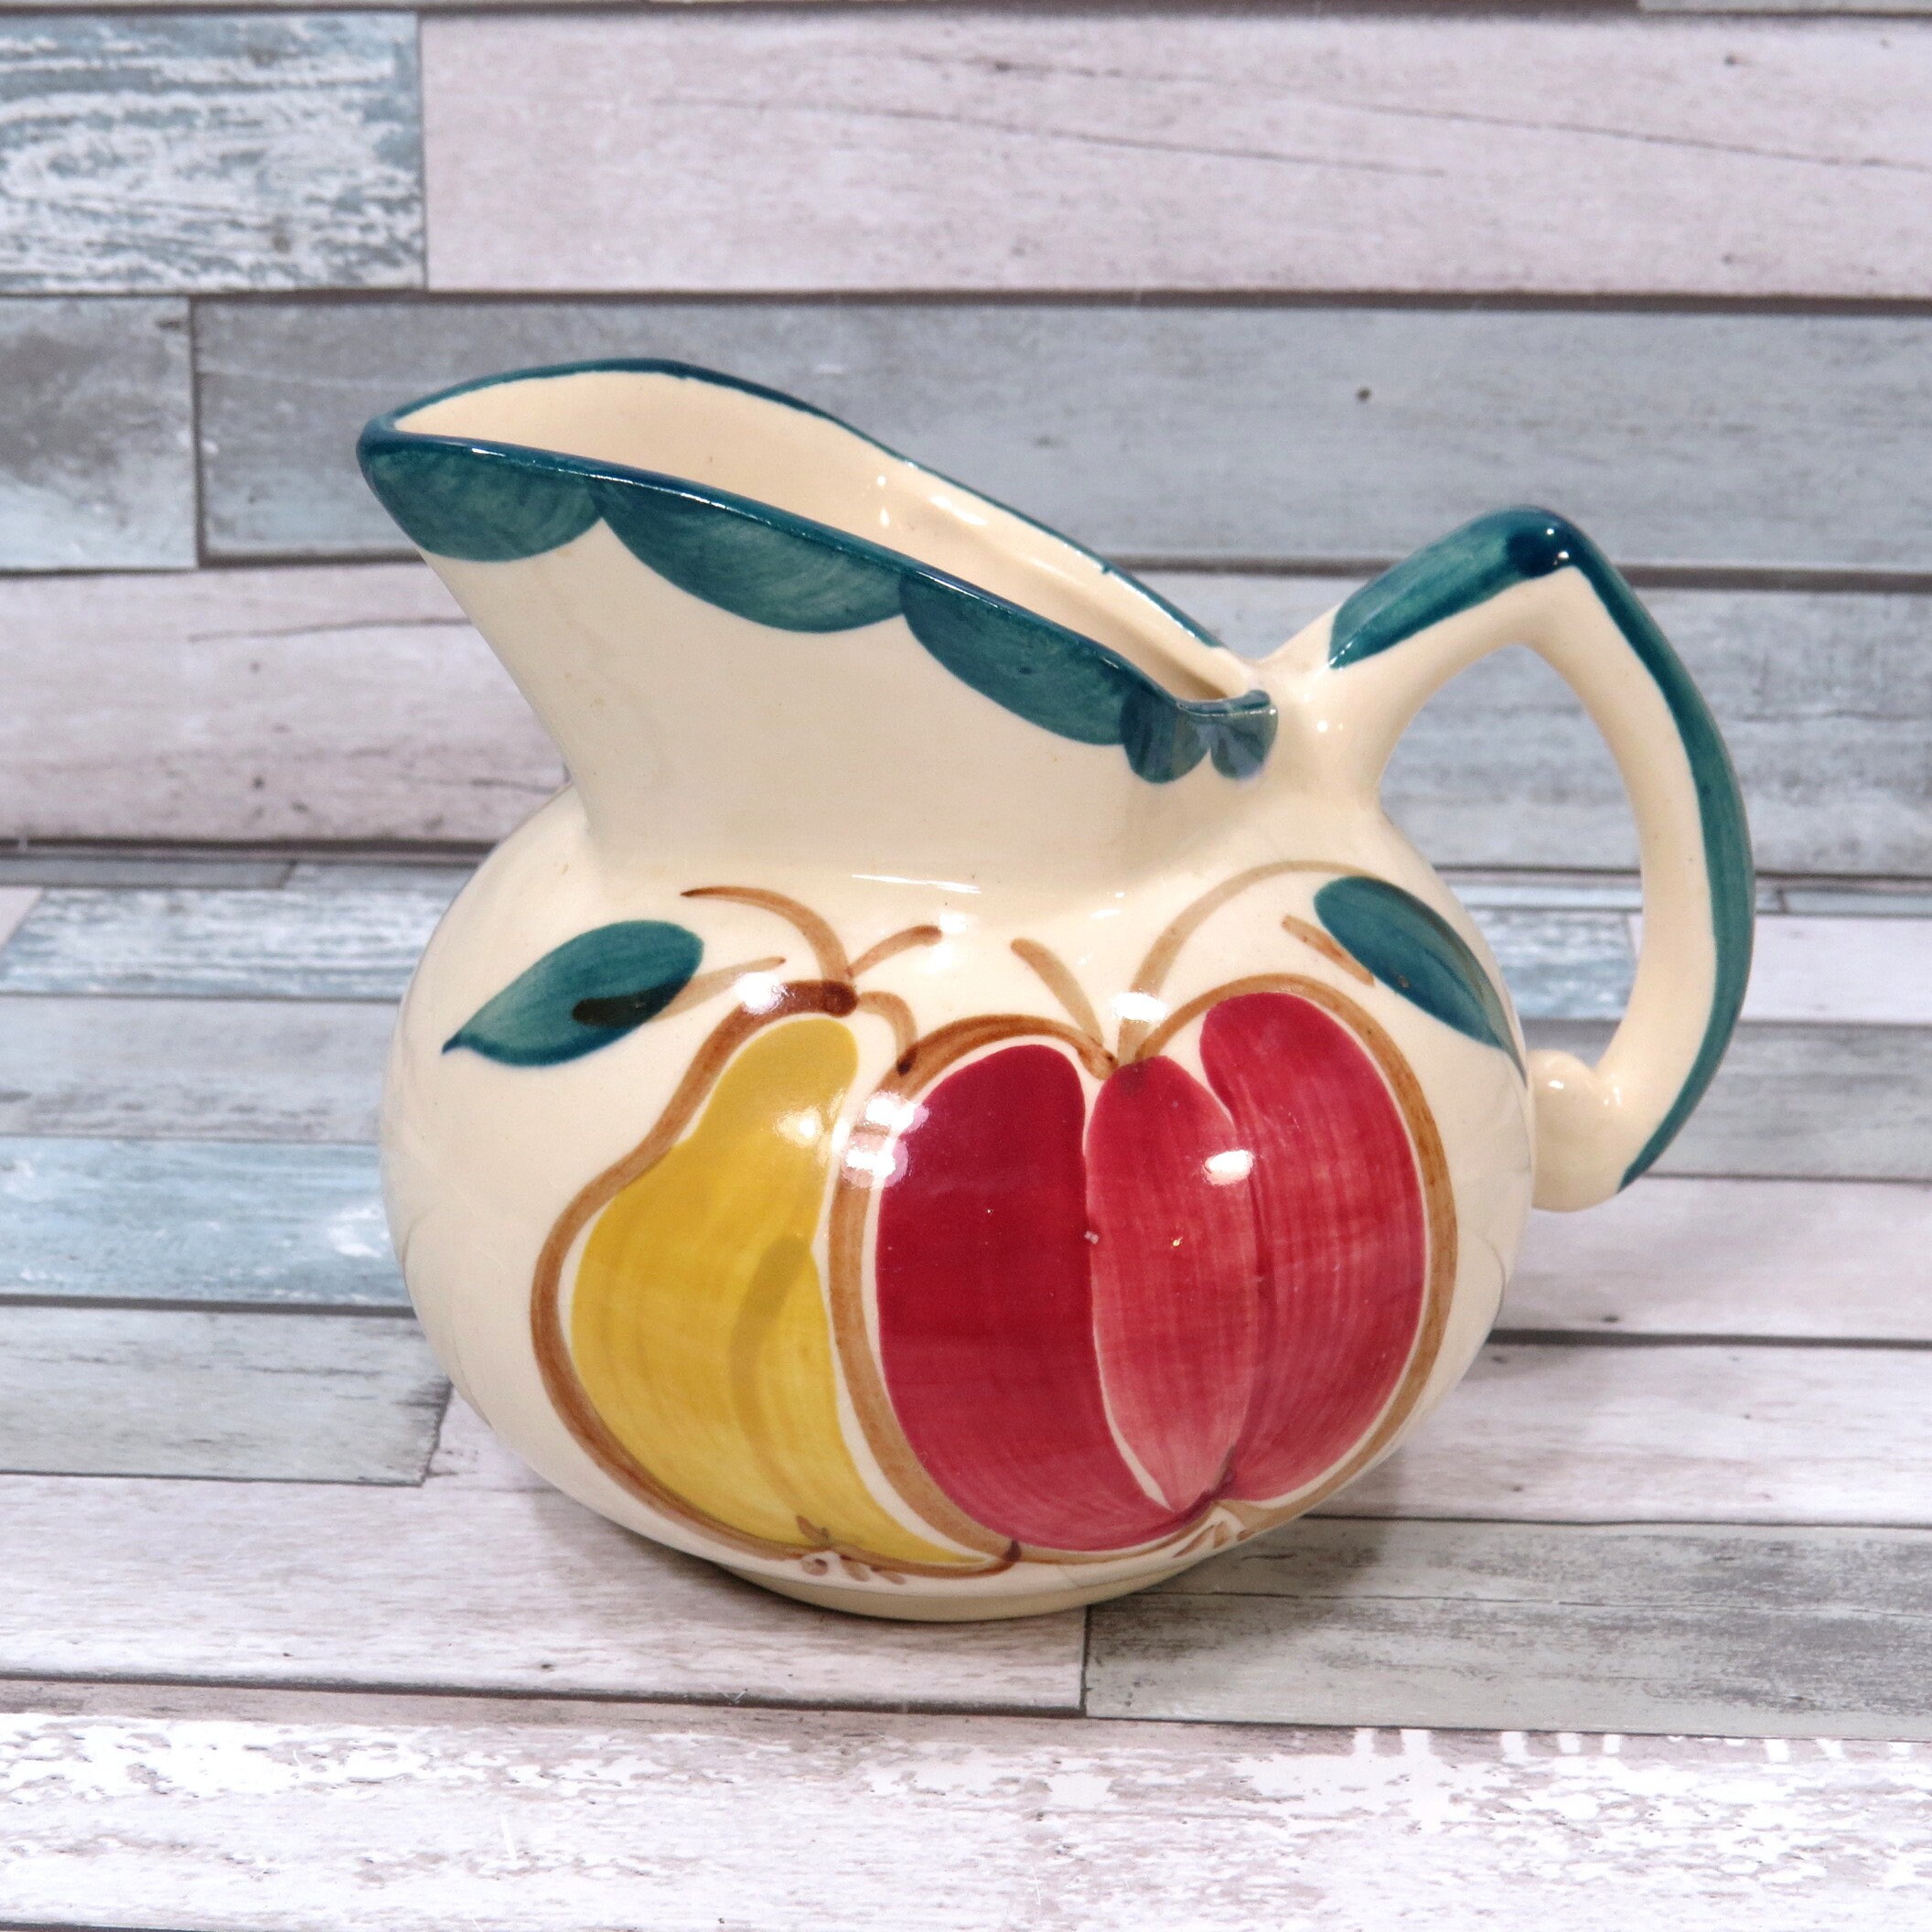 Stoneware Serving Pitcher with Apple, Pear and Grapes – The Standing Rabbit